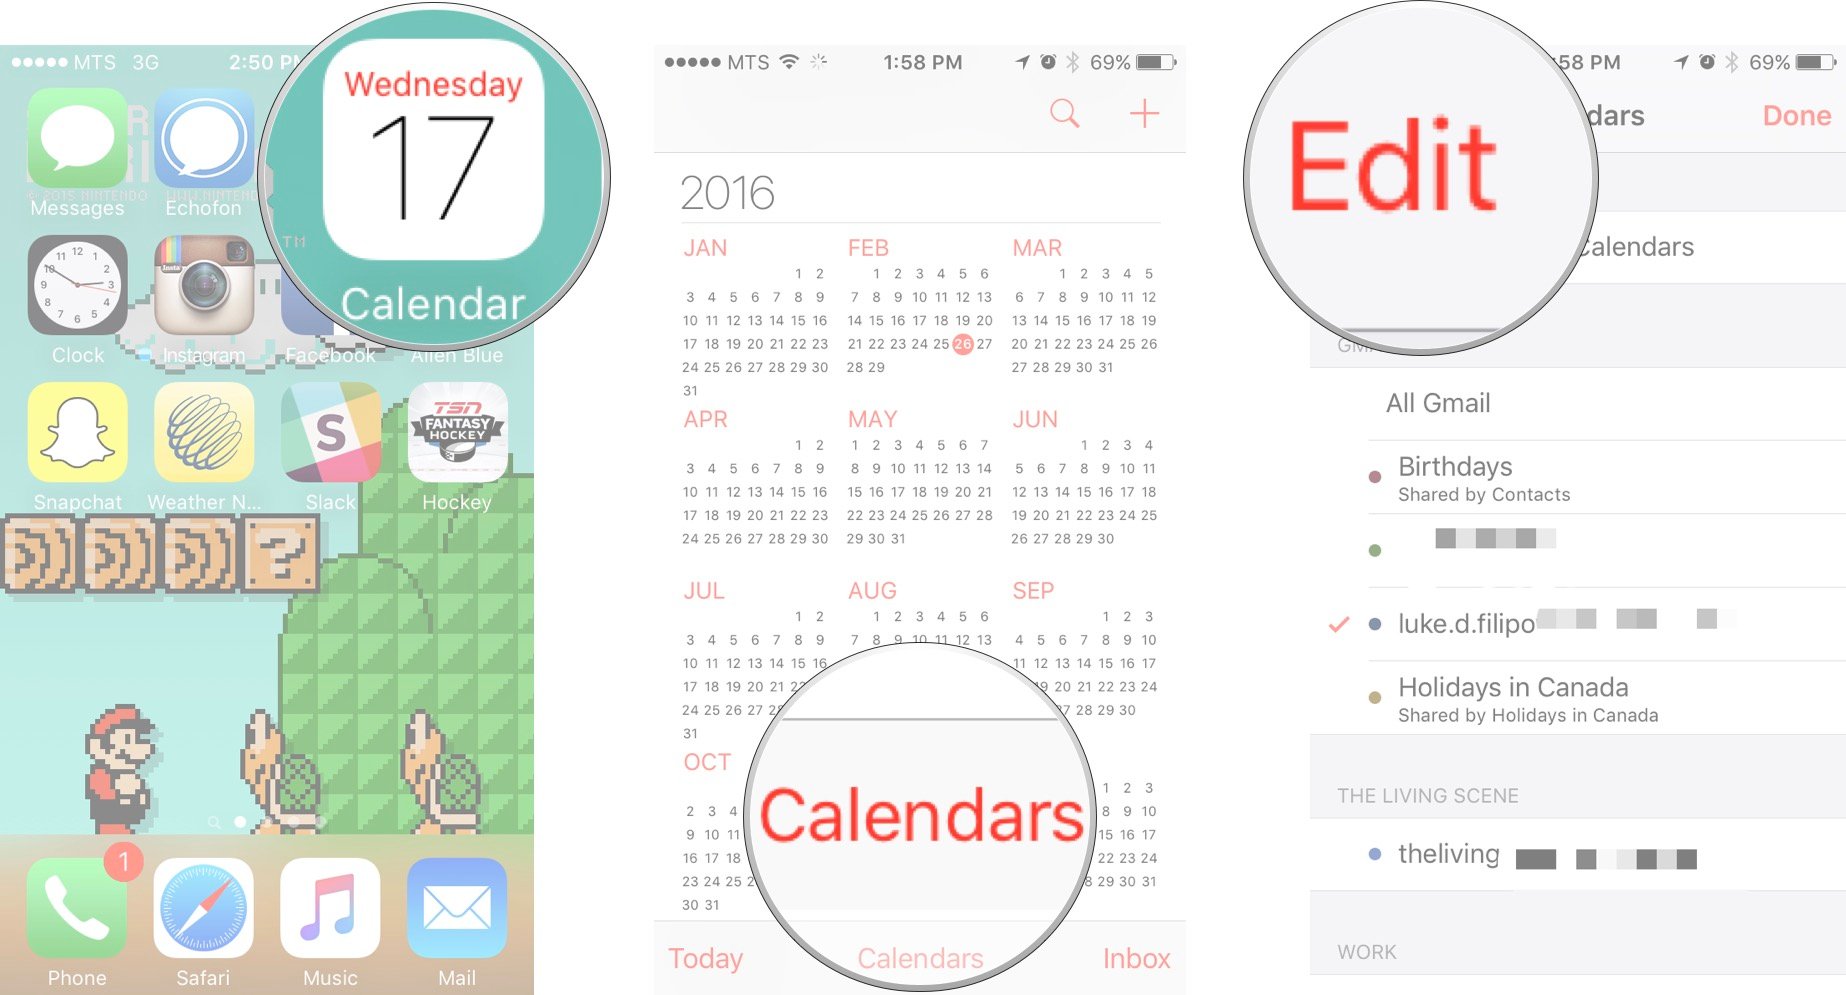 Launch the Calendar, tap on the Calendars button, and tap on the edit button.